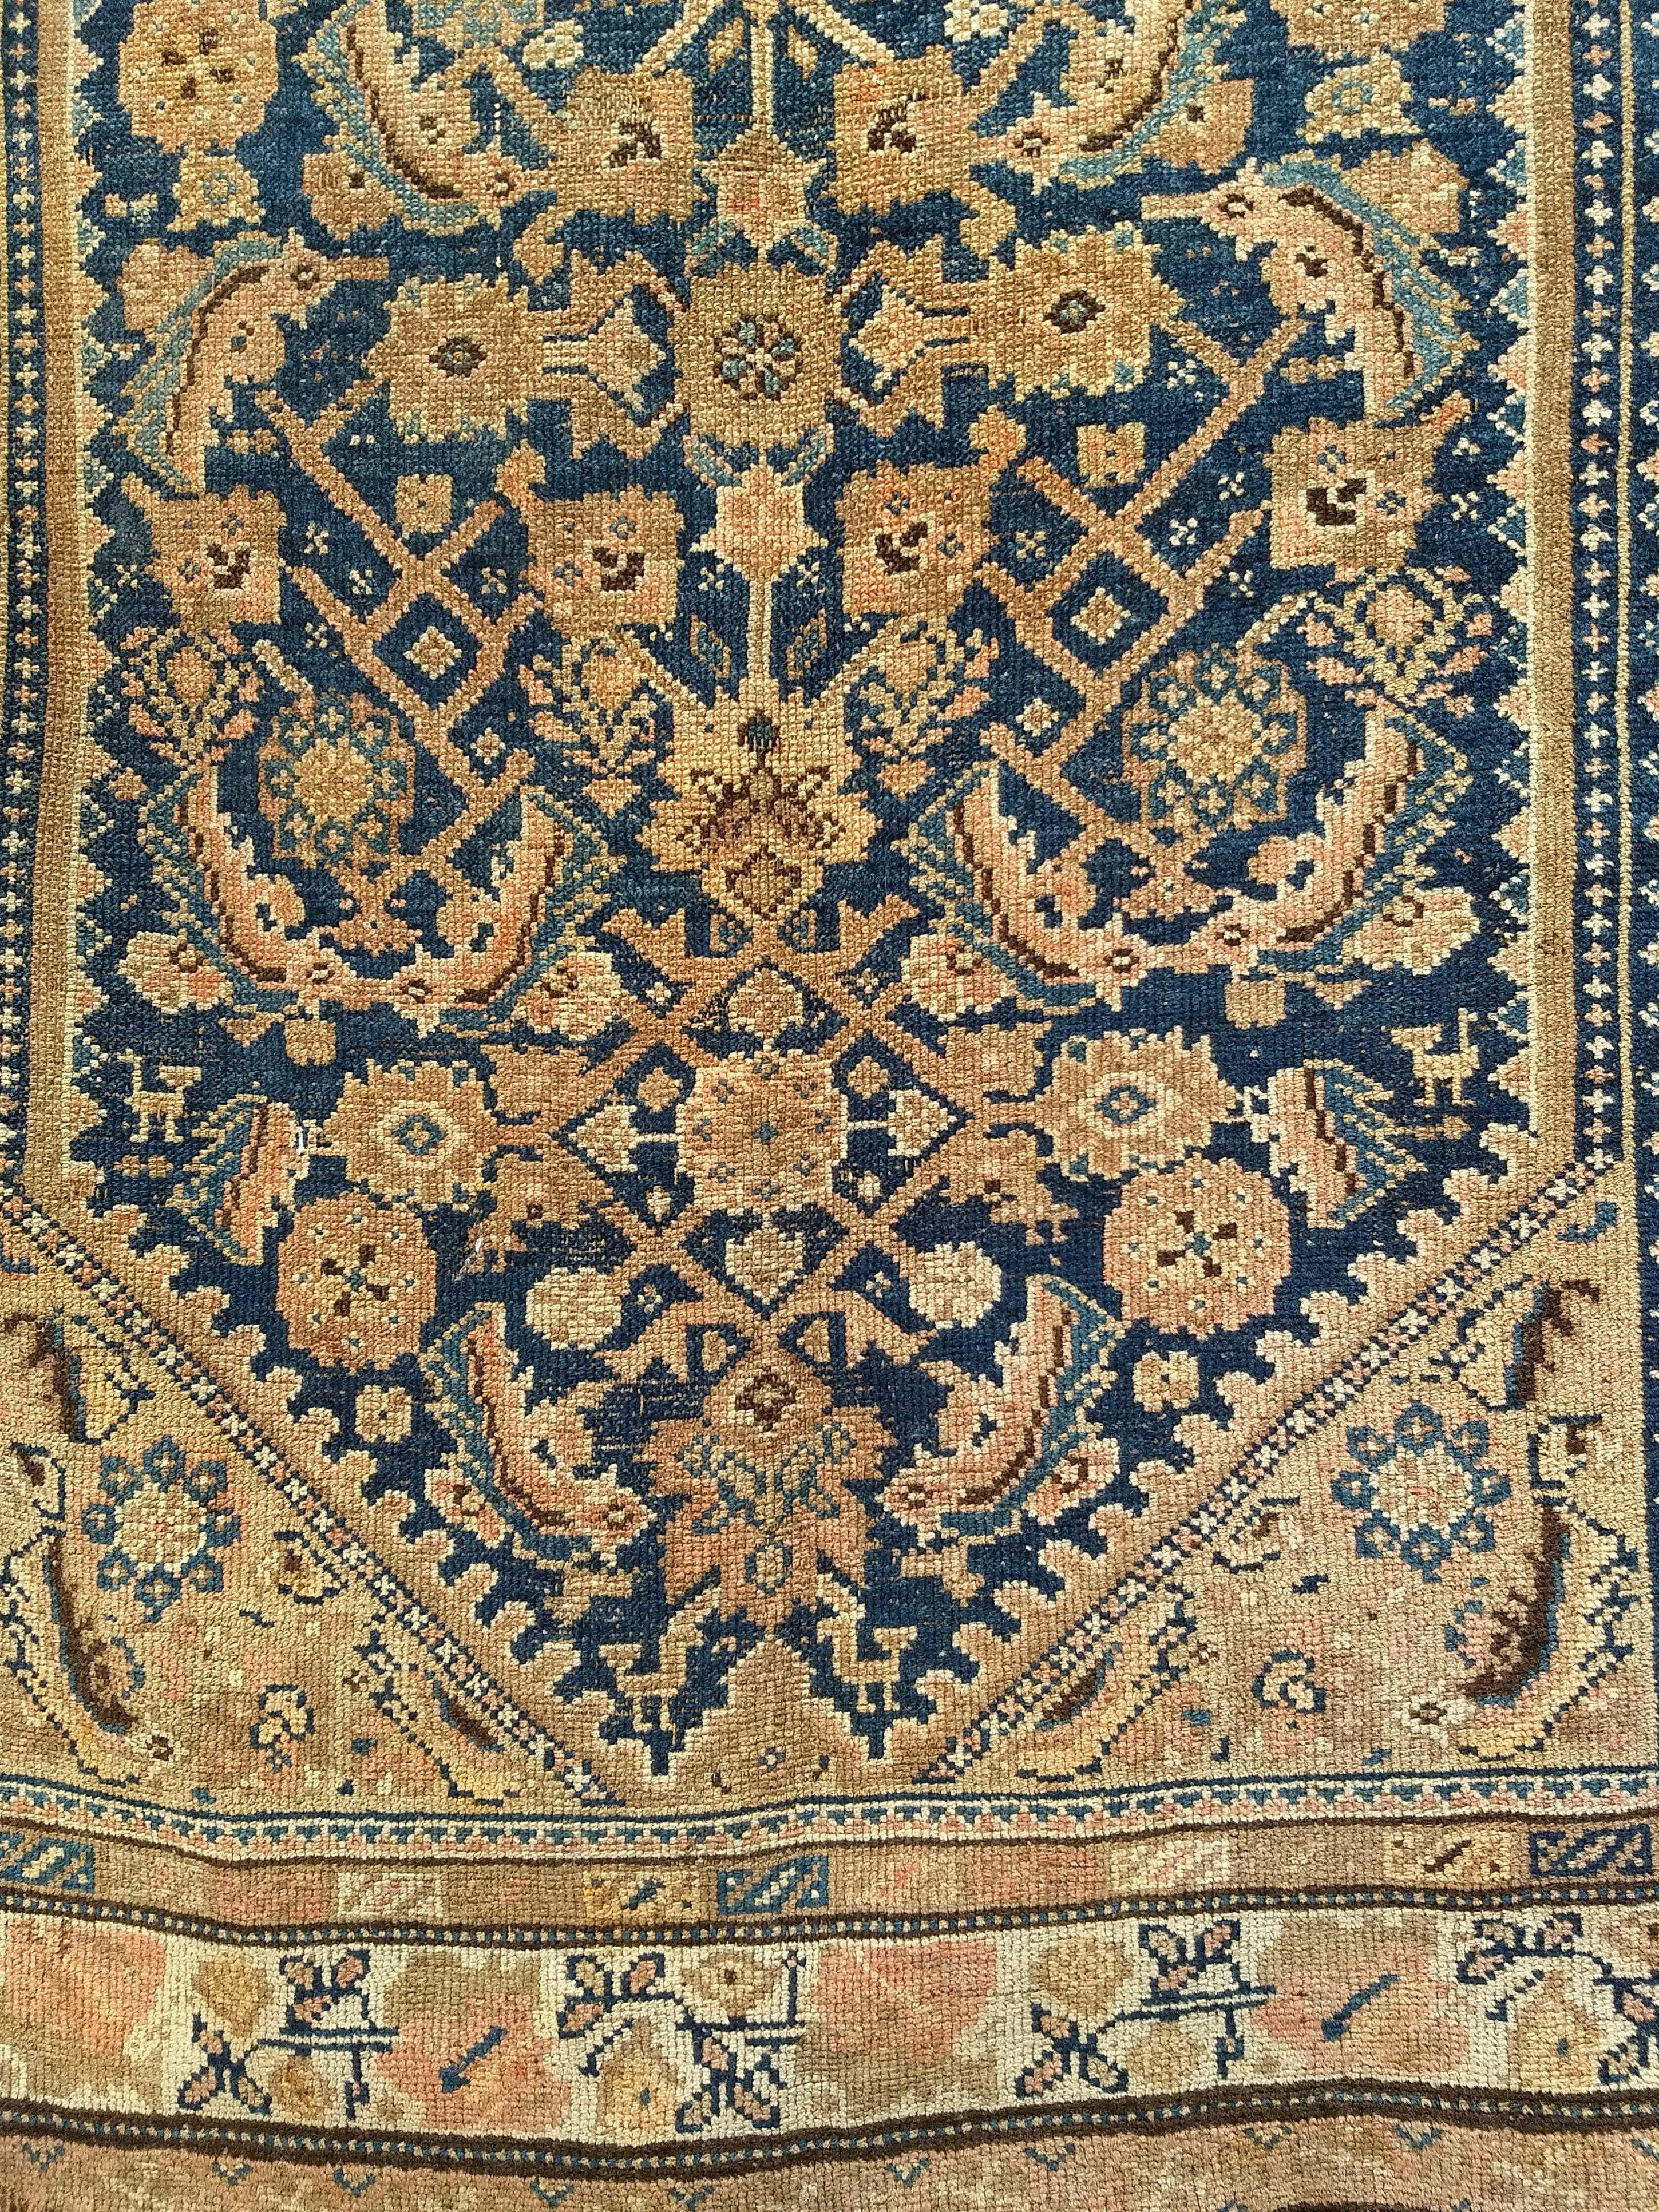 Vintage Persian Malayer Area Rug in Allover Design in Navy Blue, Brown, Ivory In Good Condition For Sale In Barrington, IL